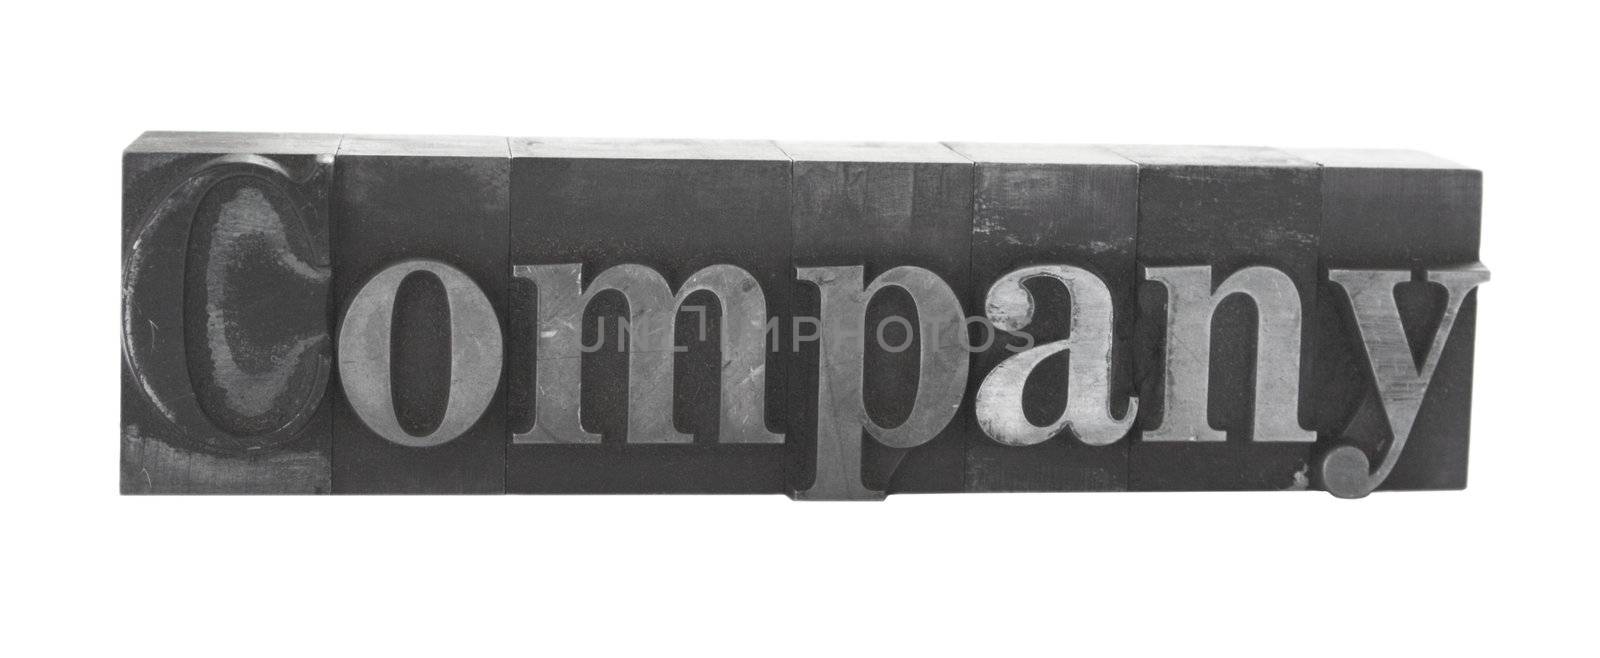 old metal letterpress letters form the word 'Company' isolated on white